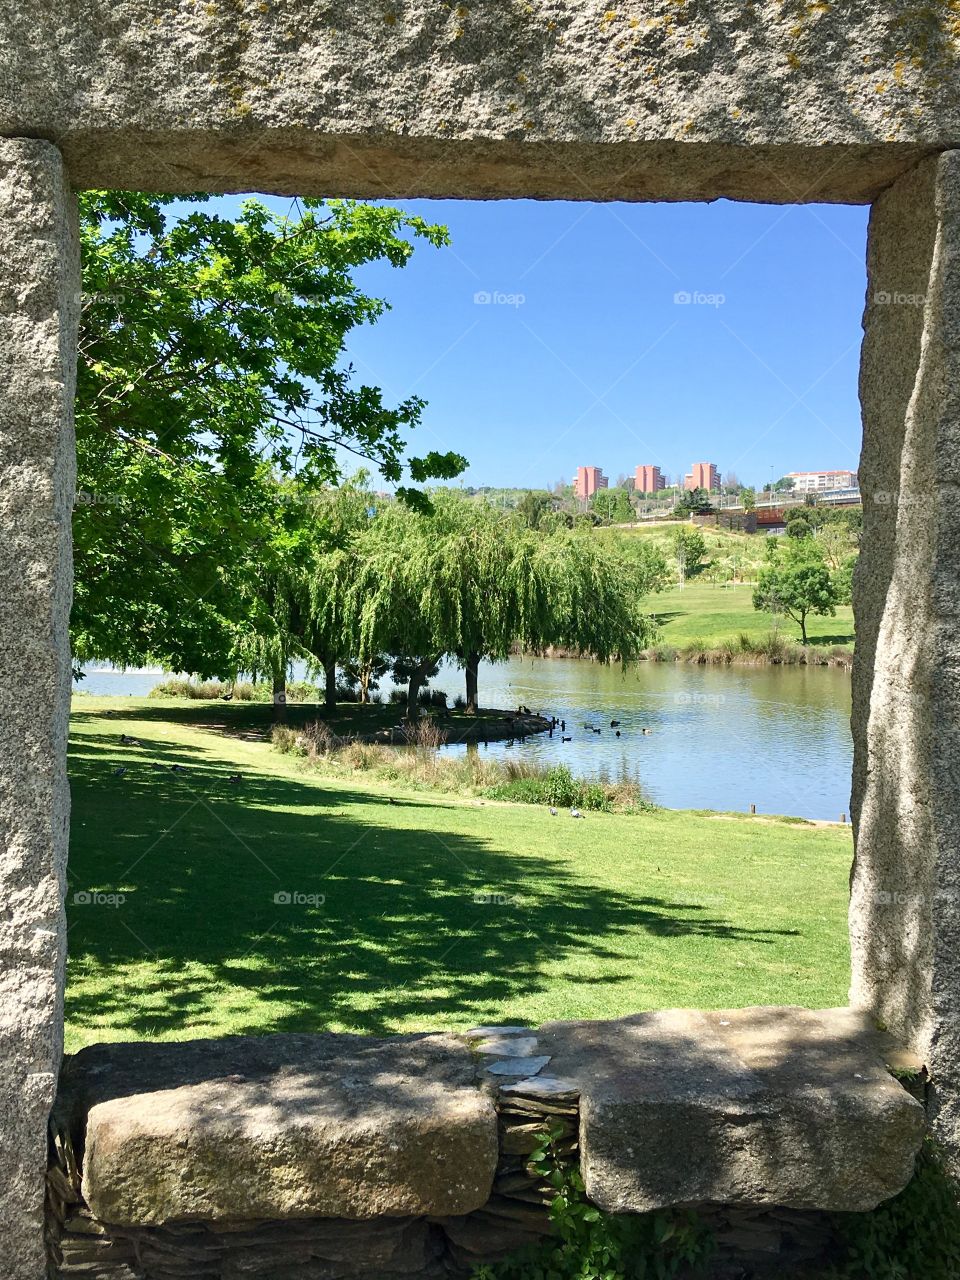 Window to the city park